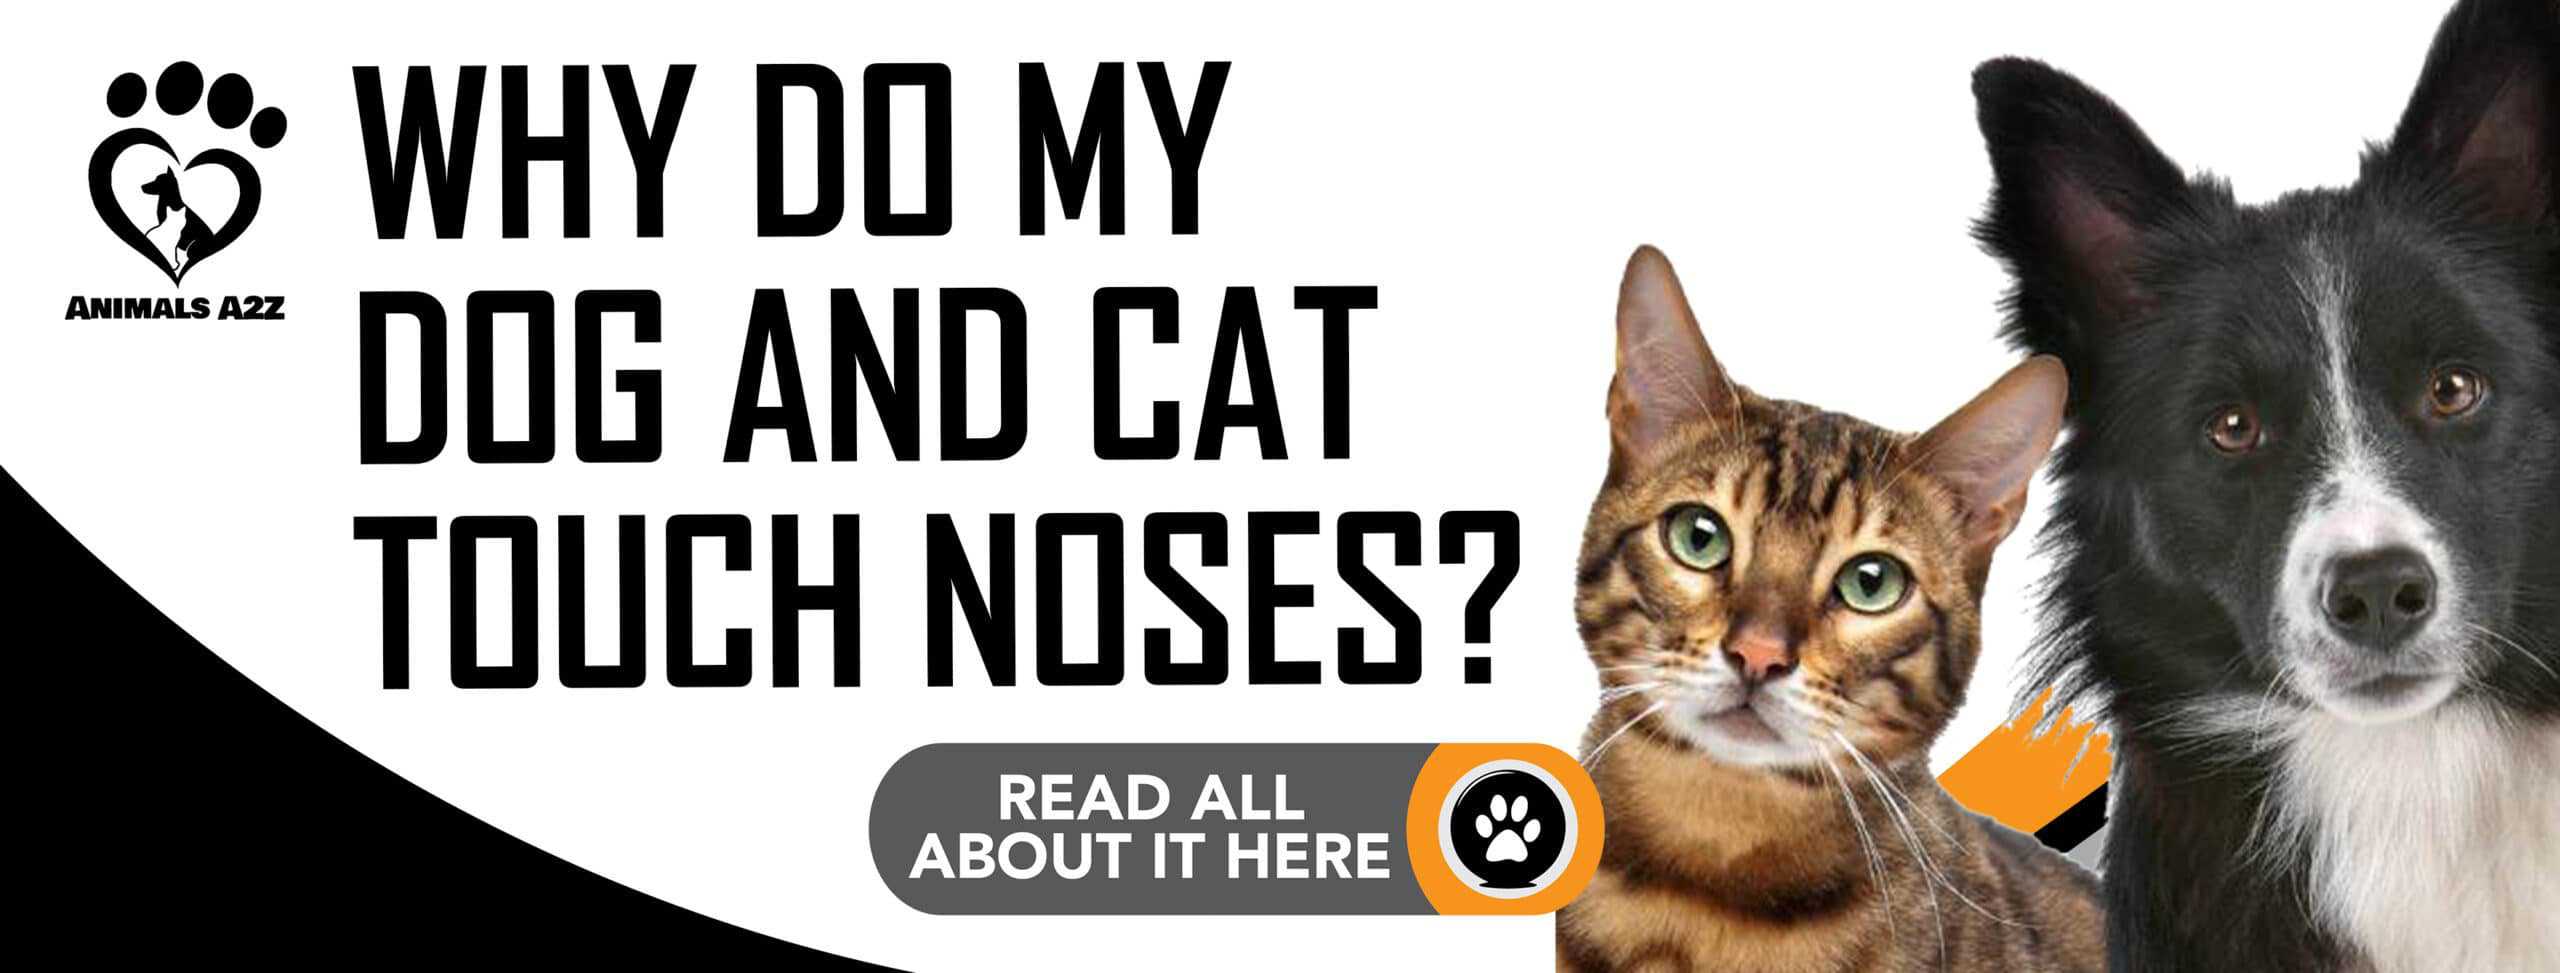 Why do my dog and cat touch noses?